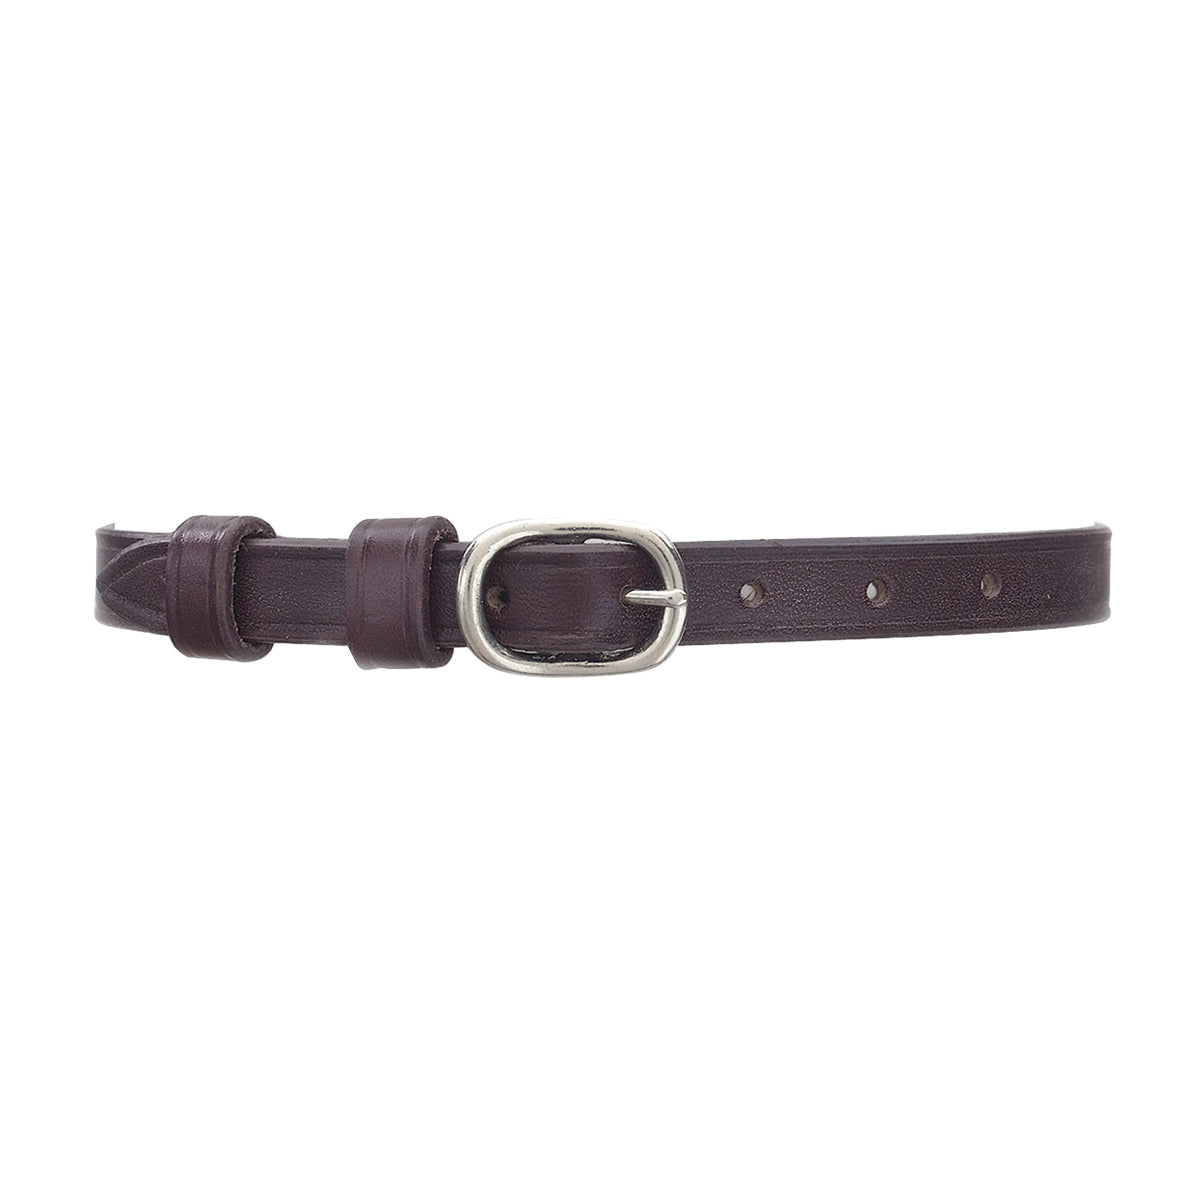 Ovation English Leather Spur Straps